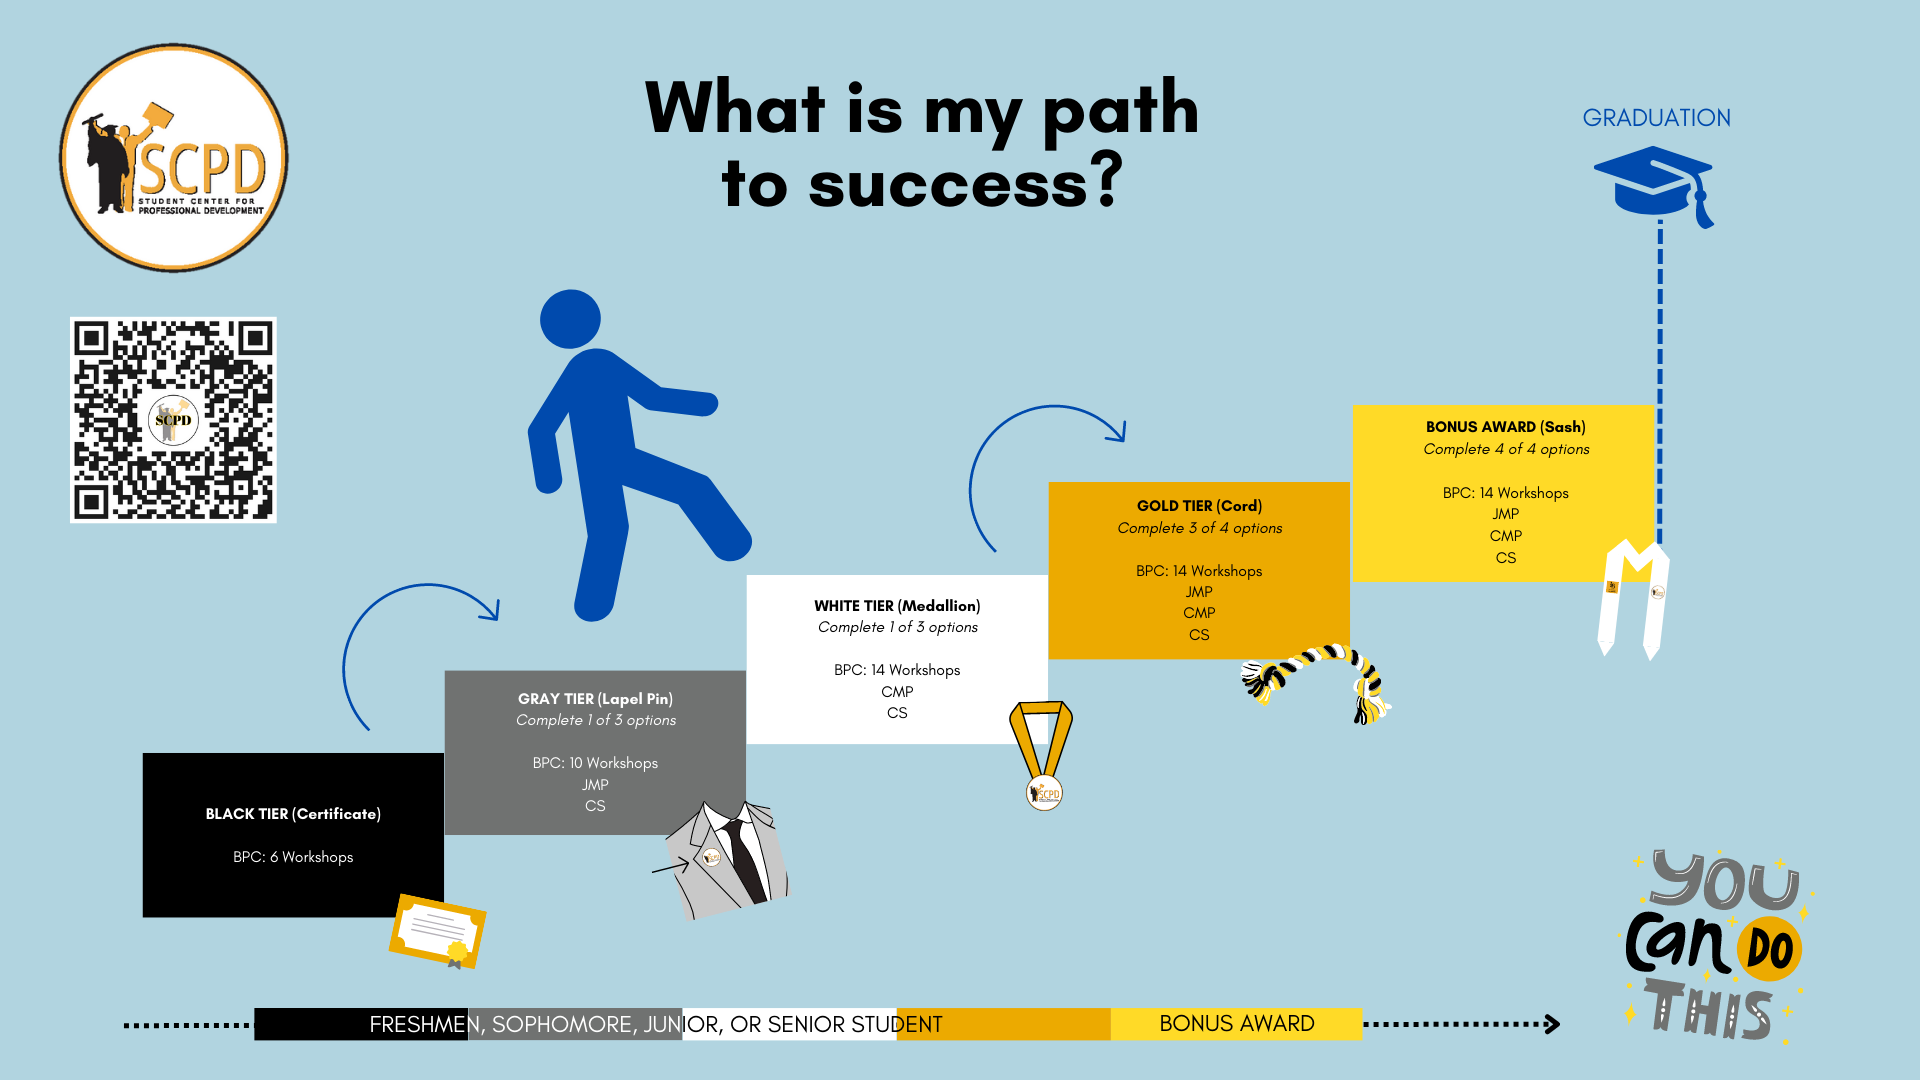 see the website for the path to your success words